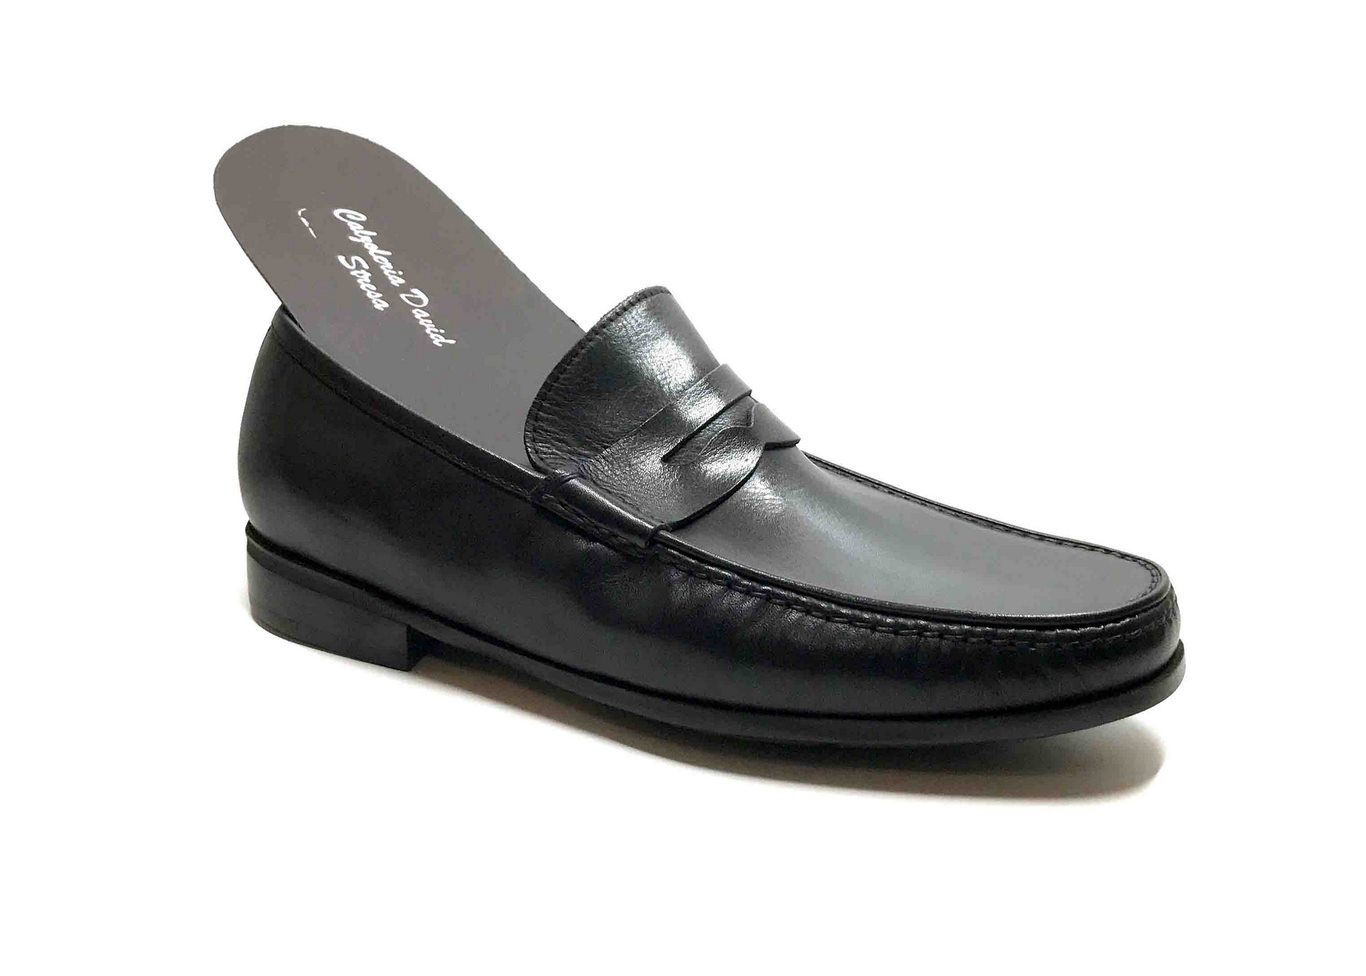 Comfort Loafer with removable insoles in Black leather